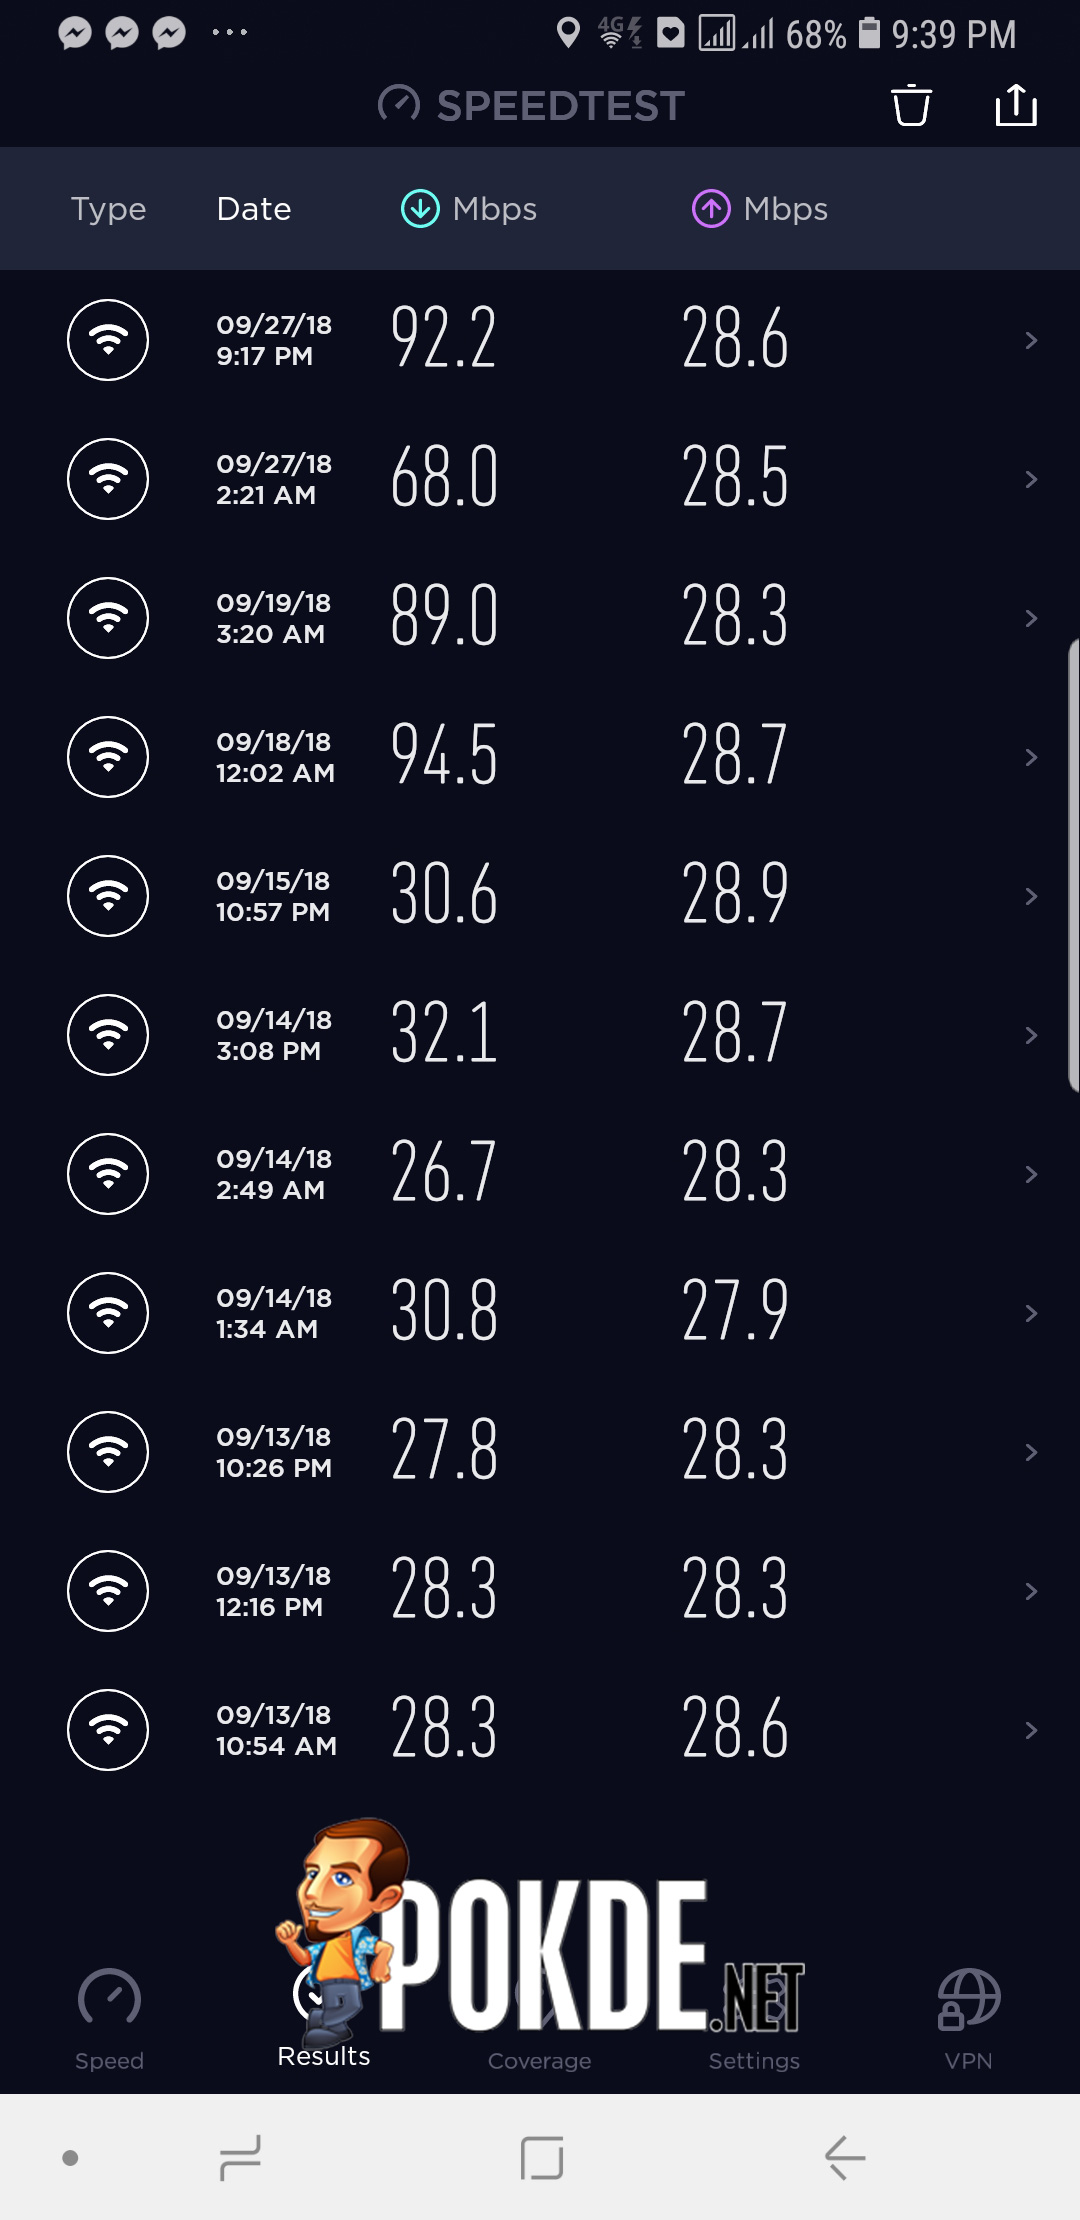 Mcmc Solved My Maxis Fibre Internet Problem Here S How I Did It Pokde Net